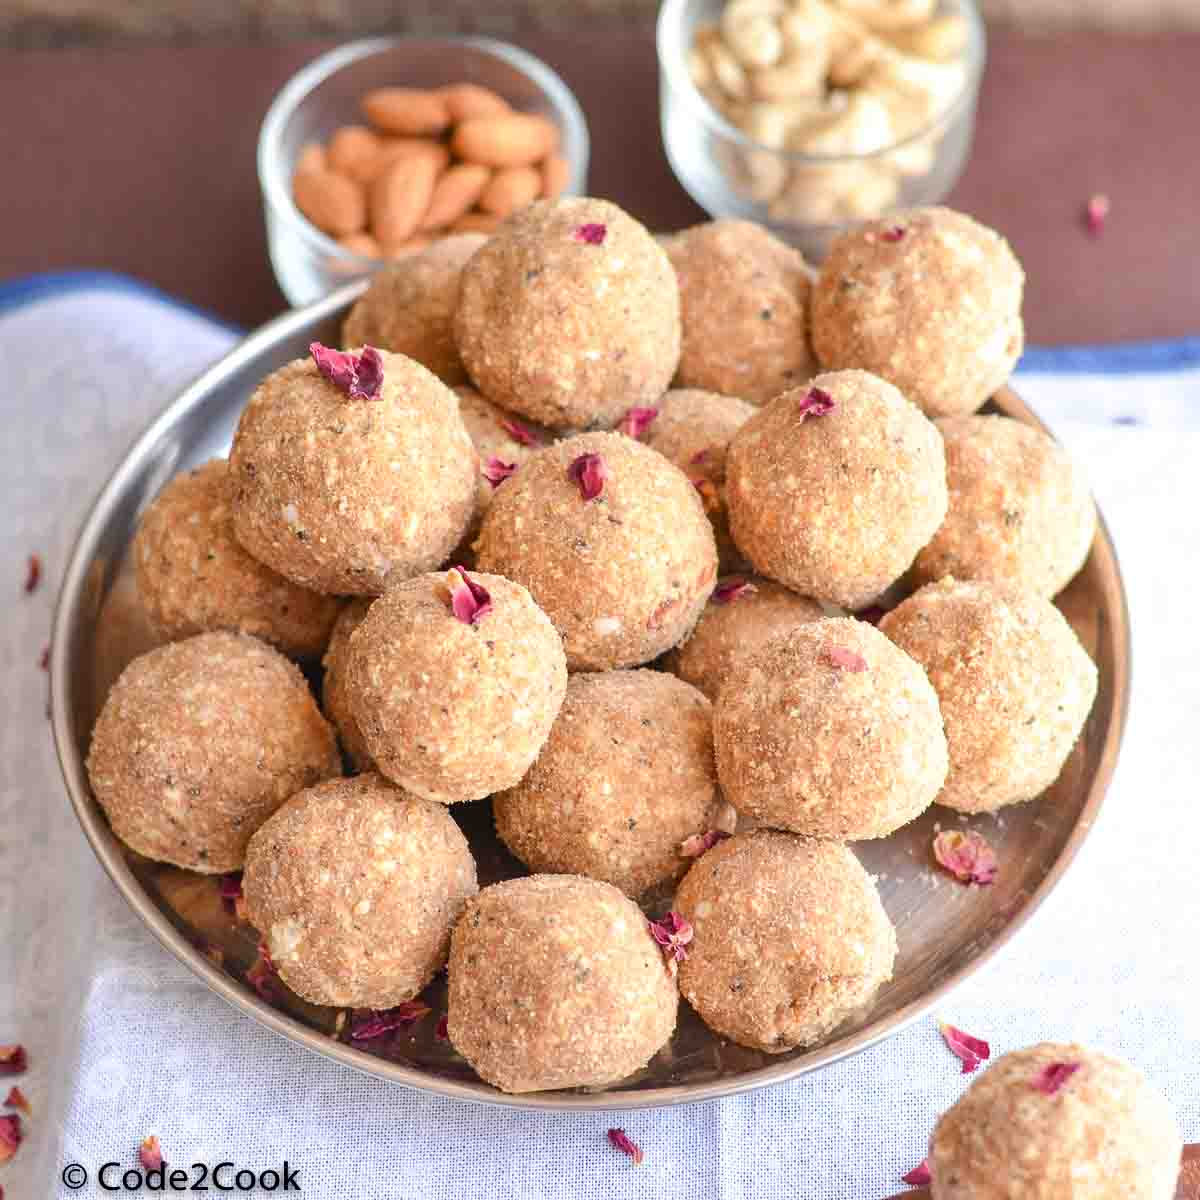 aate ke laddu served in a big plate with cashew almond & wooden spoons.